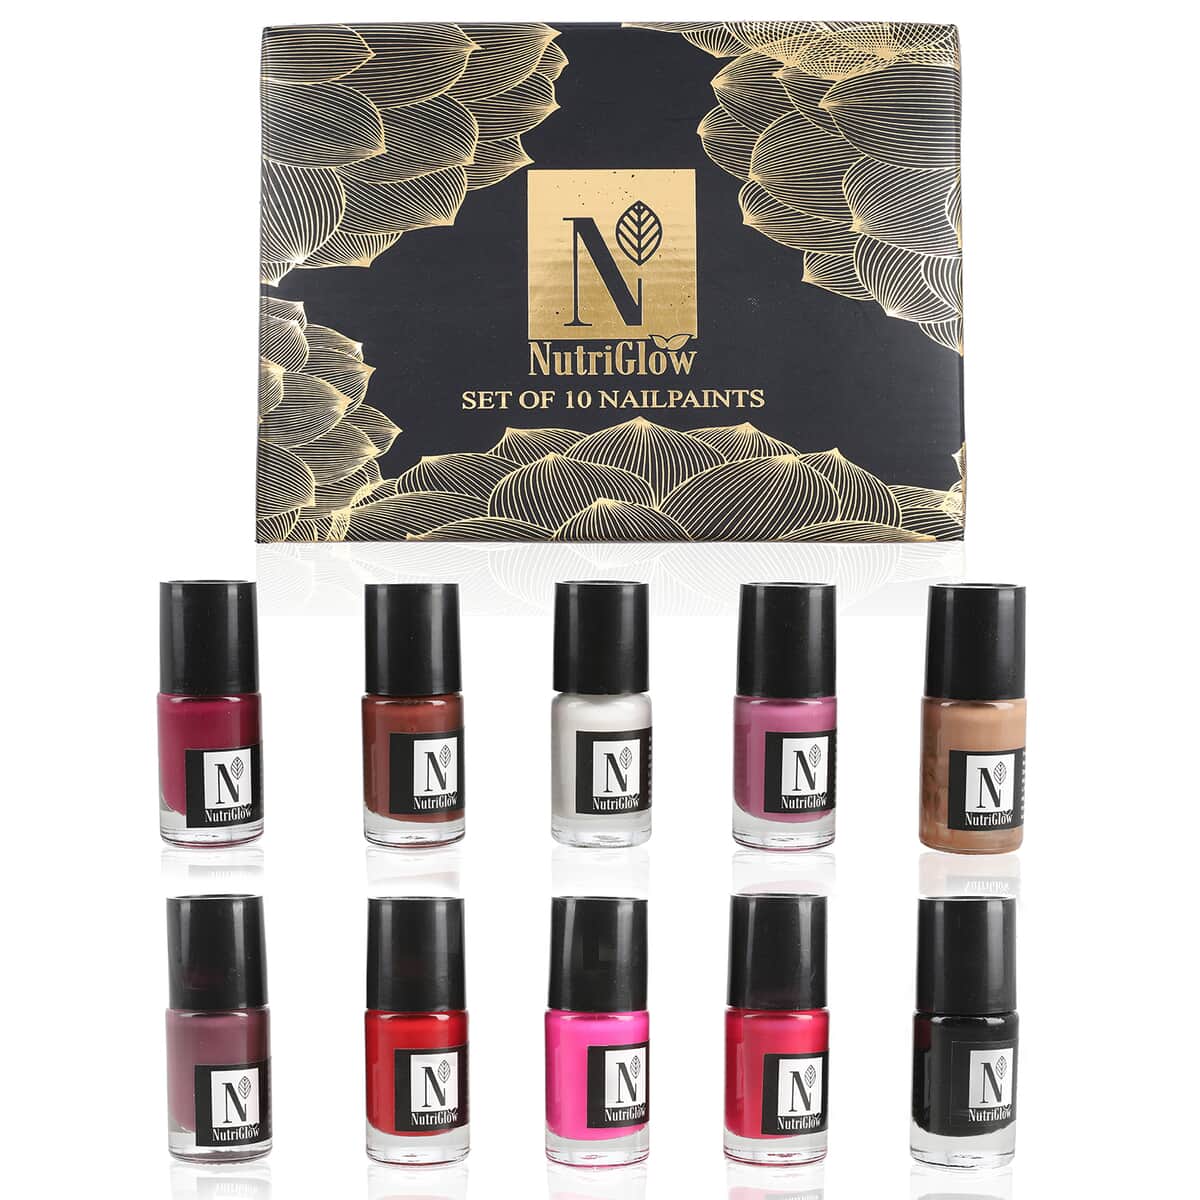 Nutriglow Set of 10 Nail Polishes (10 ml) image number 0